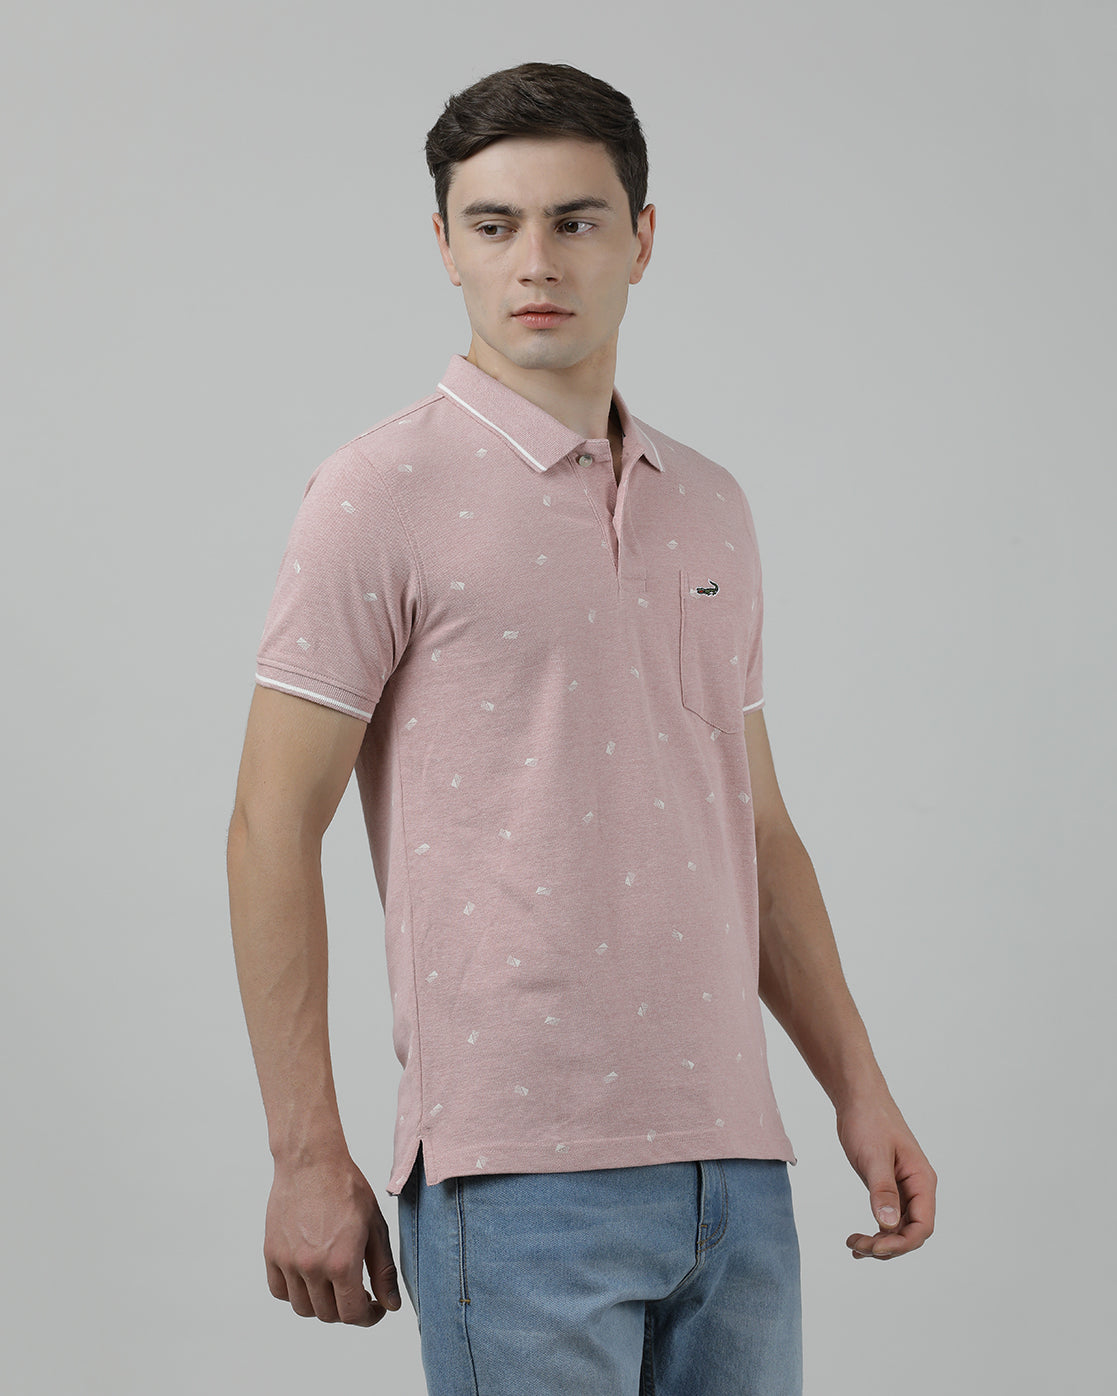 Casual Pink Printed T-Shirt Half Sleeve Slim Fit Melange with Collar for Men